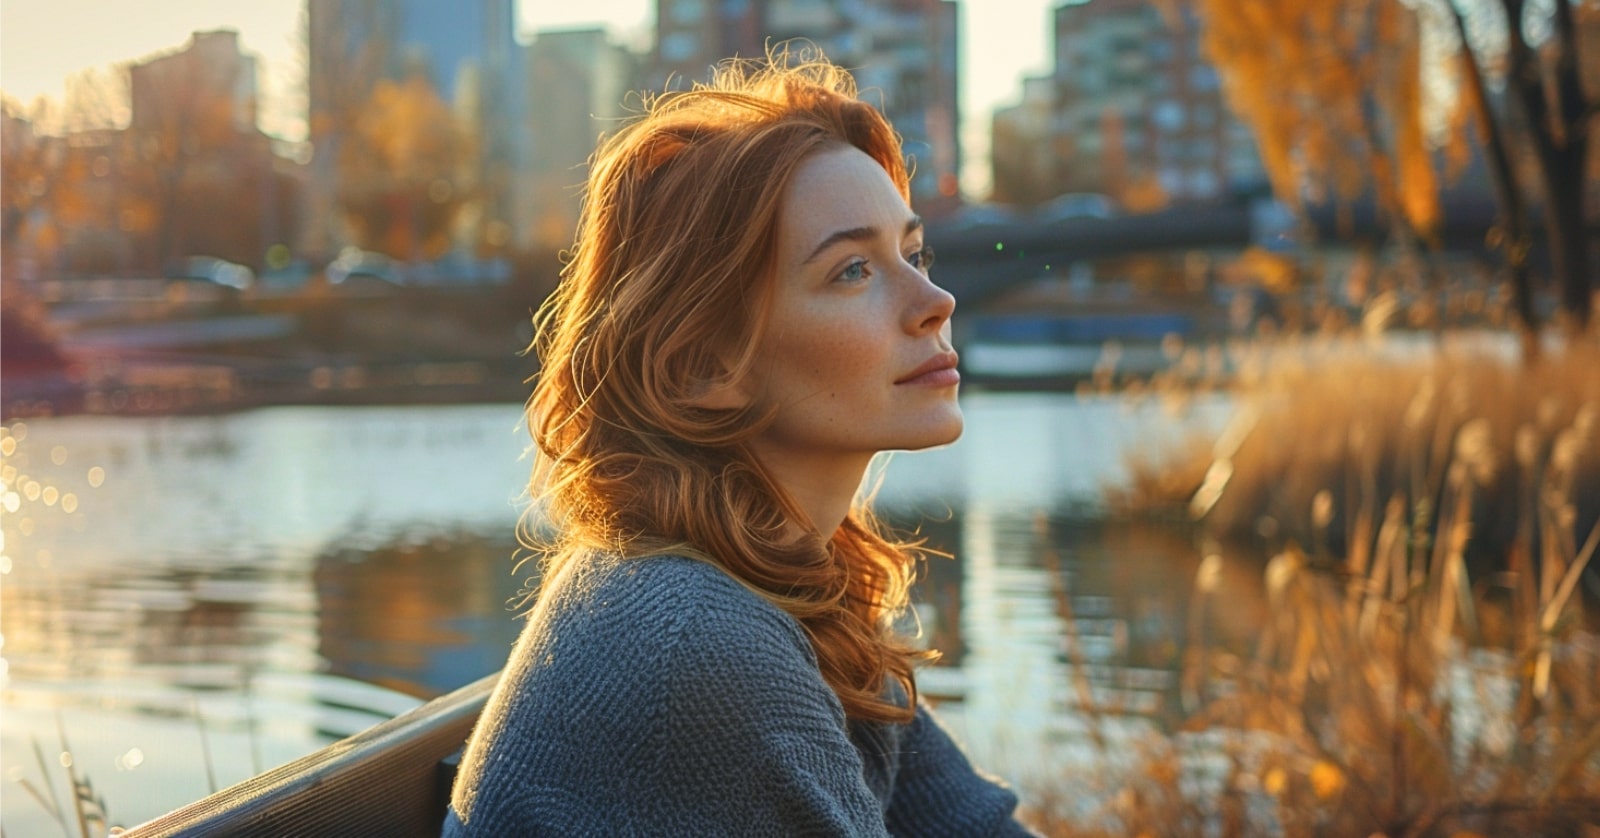 A serene redhead woman facing side on, sitting on a bench next to a pond. A cityscape is visible in the background. It is sunny.